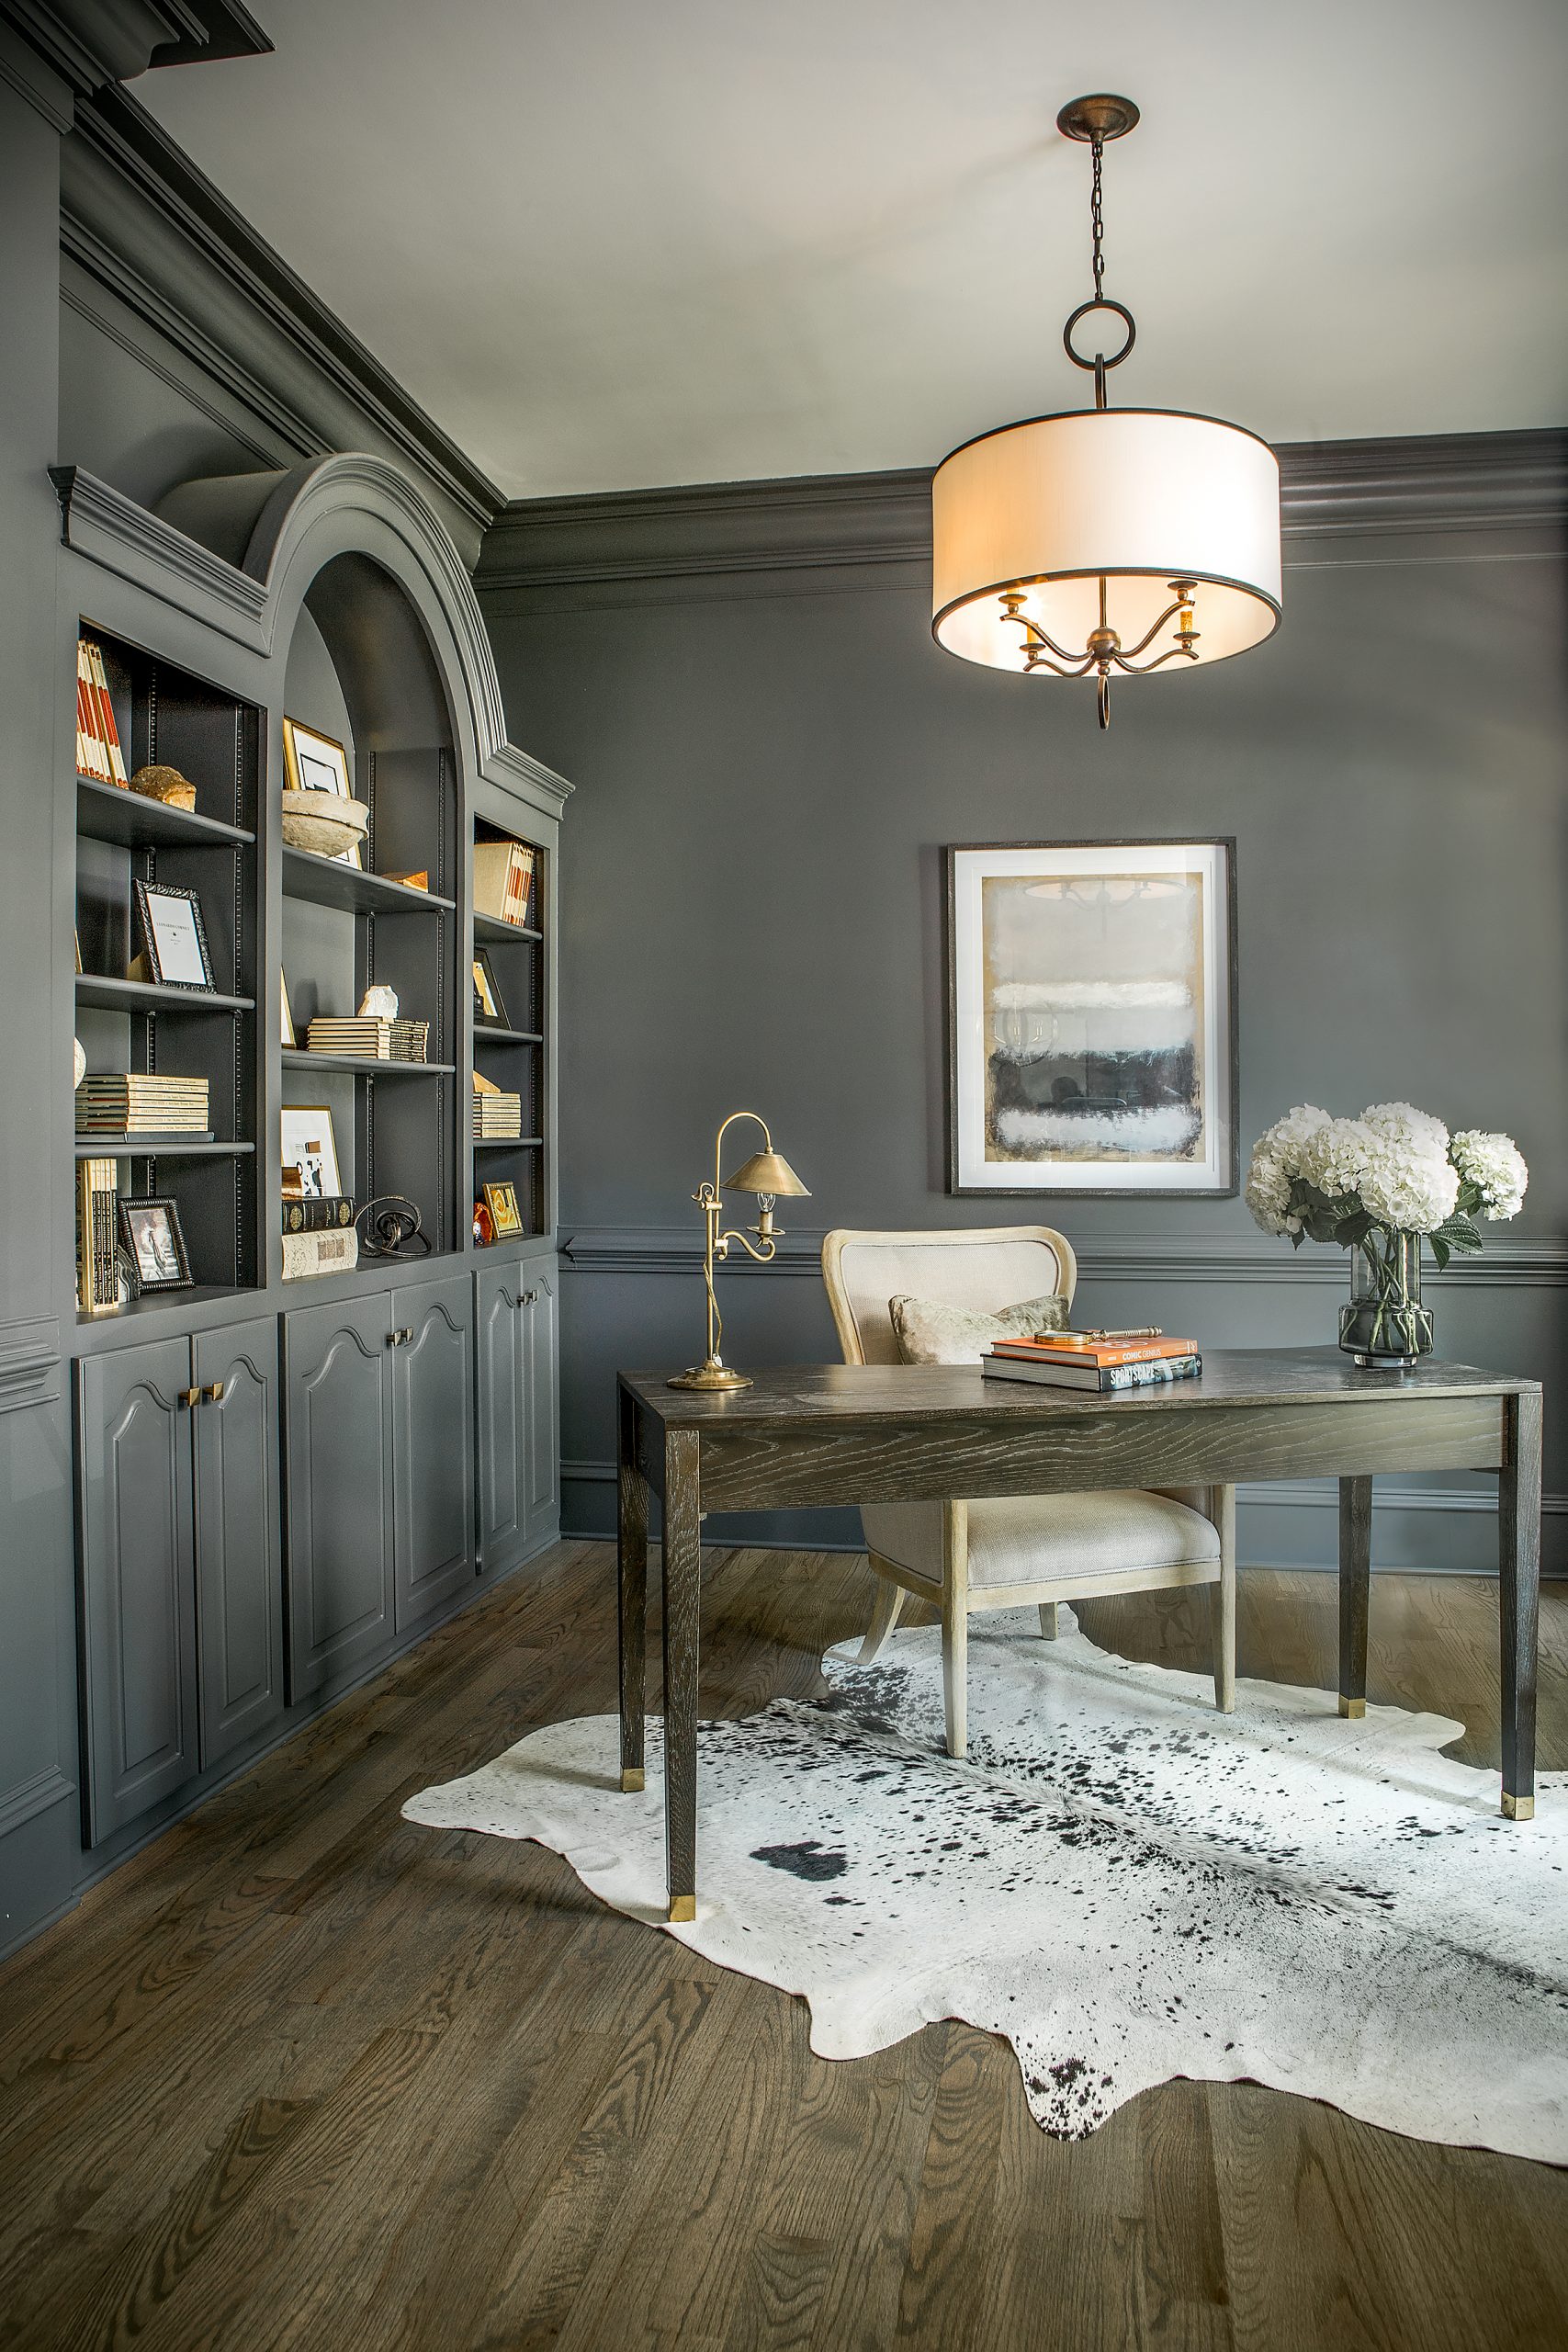 Veronica chose Sherwin-Williams’ Peppercorn gray for the office walls and dining room ceiling in the front of the house. The bold contrast with layers of white and dark create a perfect artistic balance. A hide rug from Southeastern Salvage grounds the office and draws attention to the brass feet of the desk. 